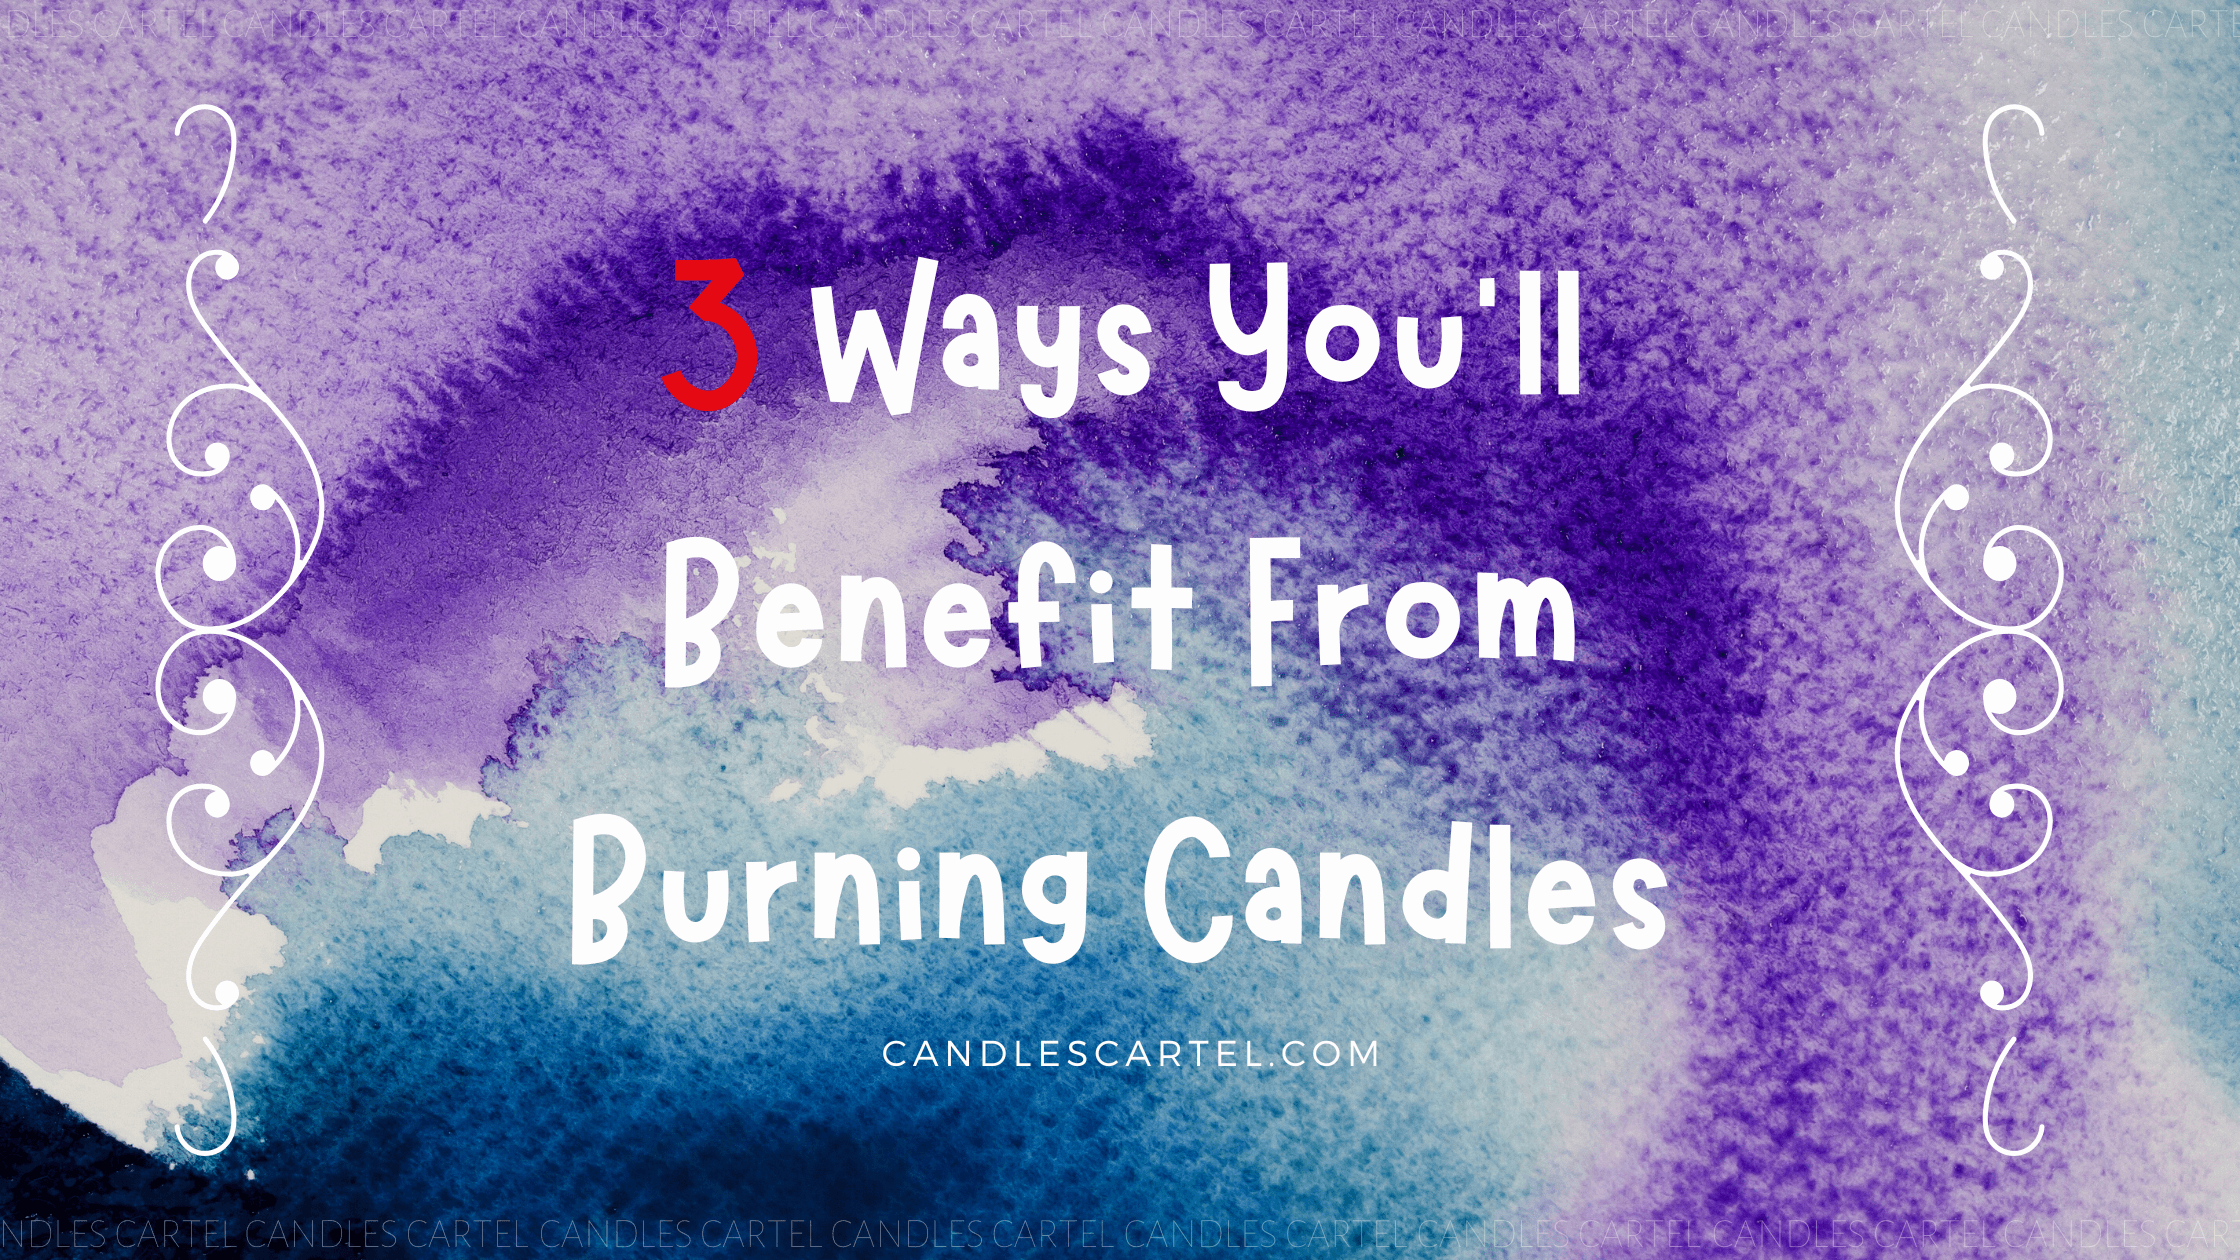 3 Ways You'll Benefit From Burning Candles  - Blog Article